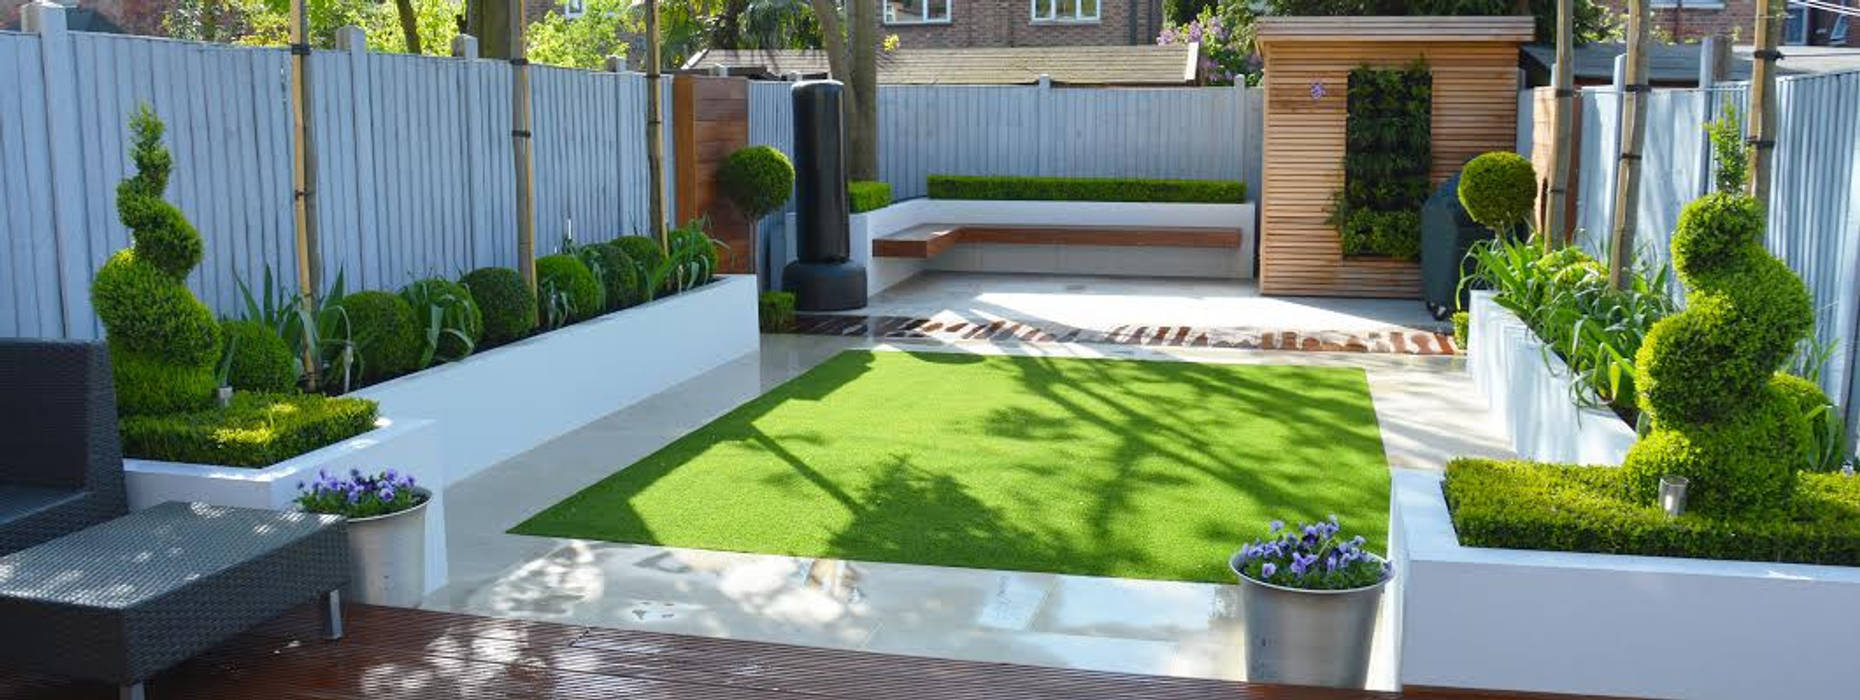 Minimalist Garden: Amazing relaxing space that you will fall in love with, Landscaper in London Landscaper in London Modern Garden